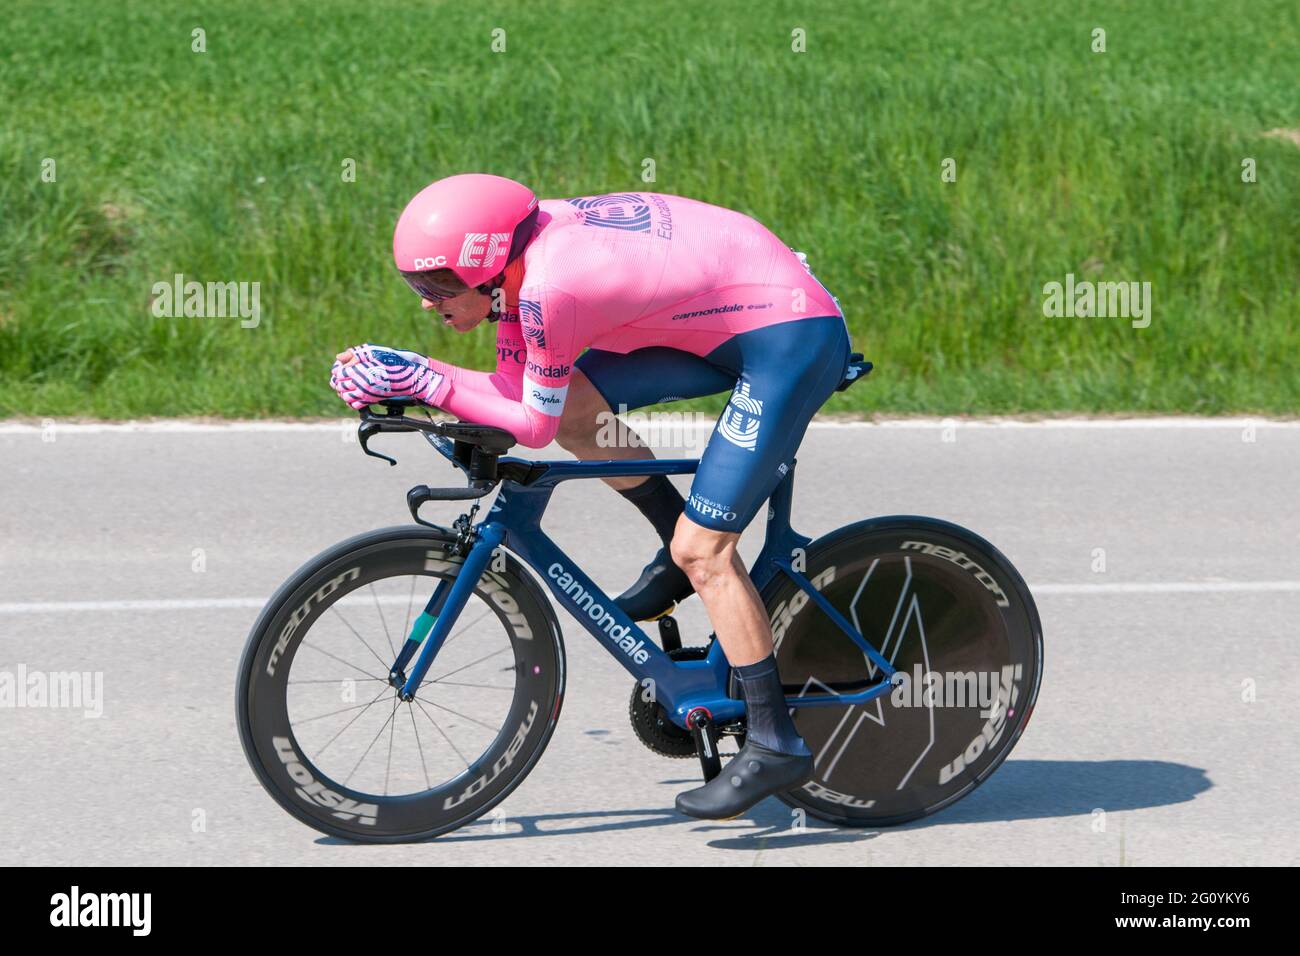 Tejay van garderen (EF education team - Nippo) seen in action during an individual time trial.The Tour of Catalonia Cycling 2021 took place from March 22 to March 28, 2021. The second stage on March 23, 2021 is a time trial of 18.5 kilometers in the town of Banyoles (Spain). The winner of this stage is the Australian Rohan Dennis (Team Ineos Grenadiers). The winner of the final general classification is the British Adam Yates (Team Ineos Grenadier) Stock Photo